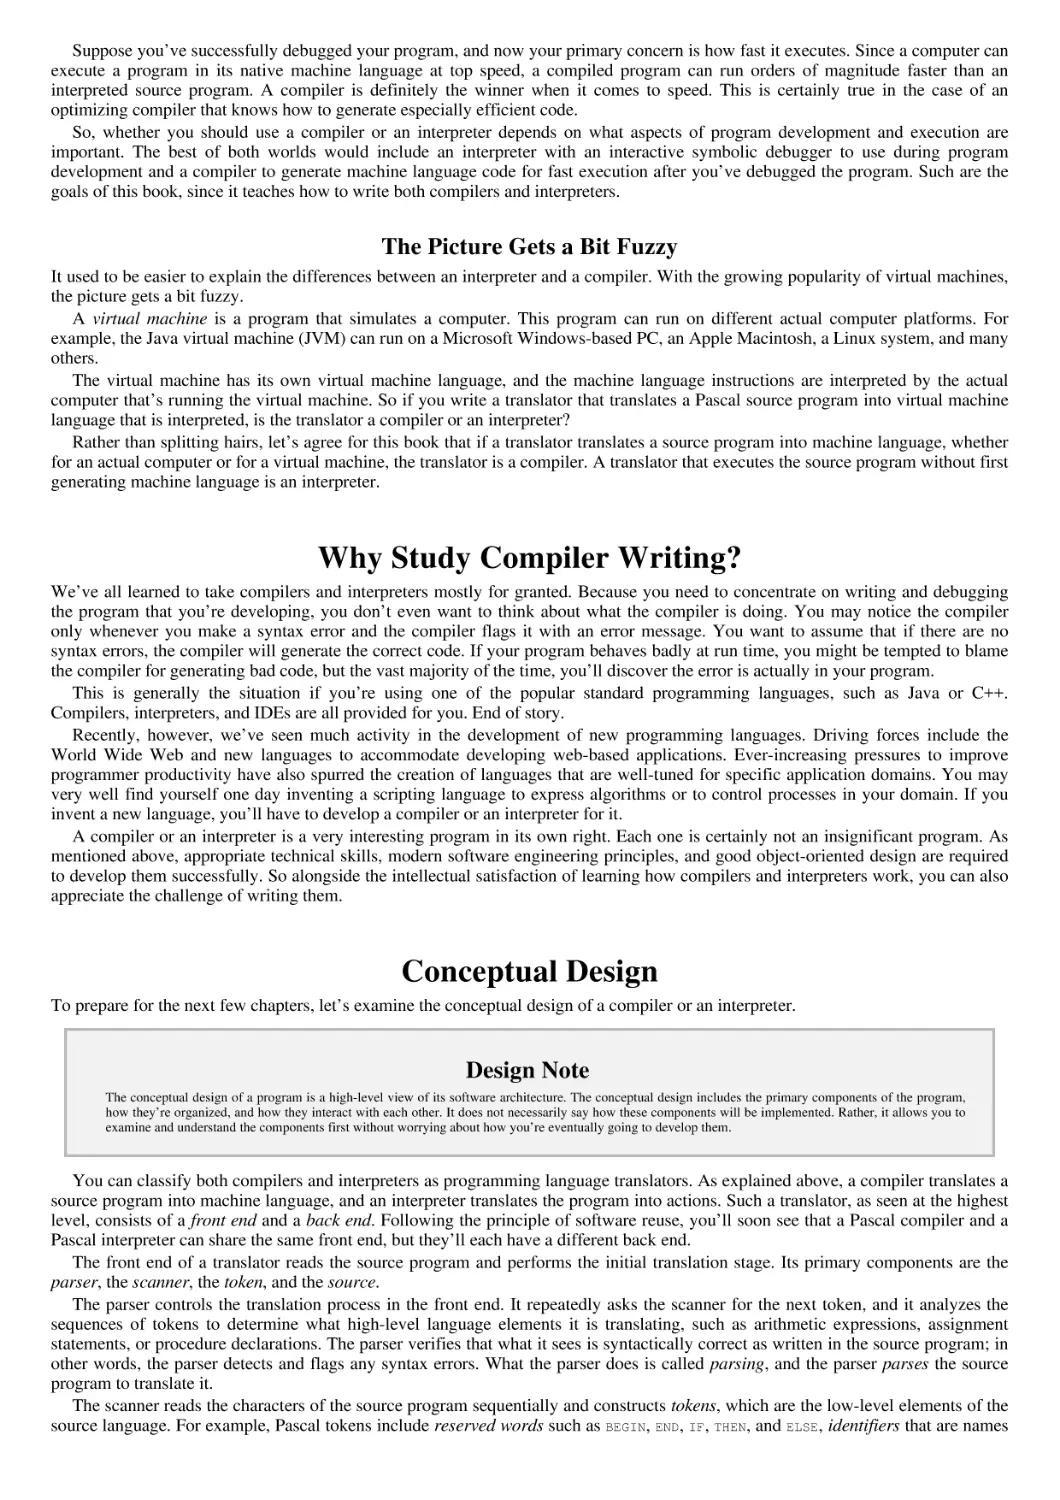 Why Study Compiler Writing?
Conceptual Design